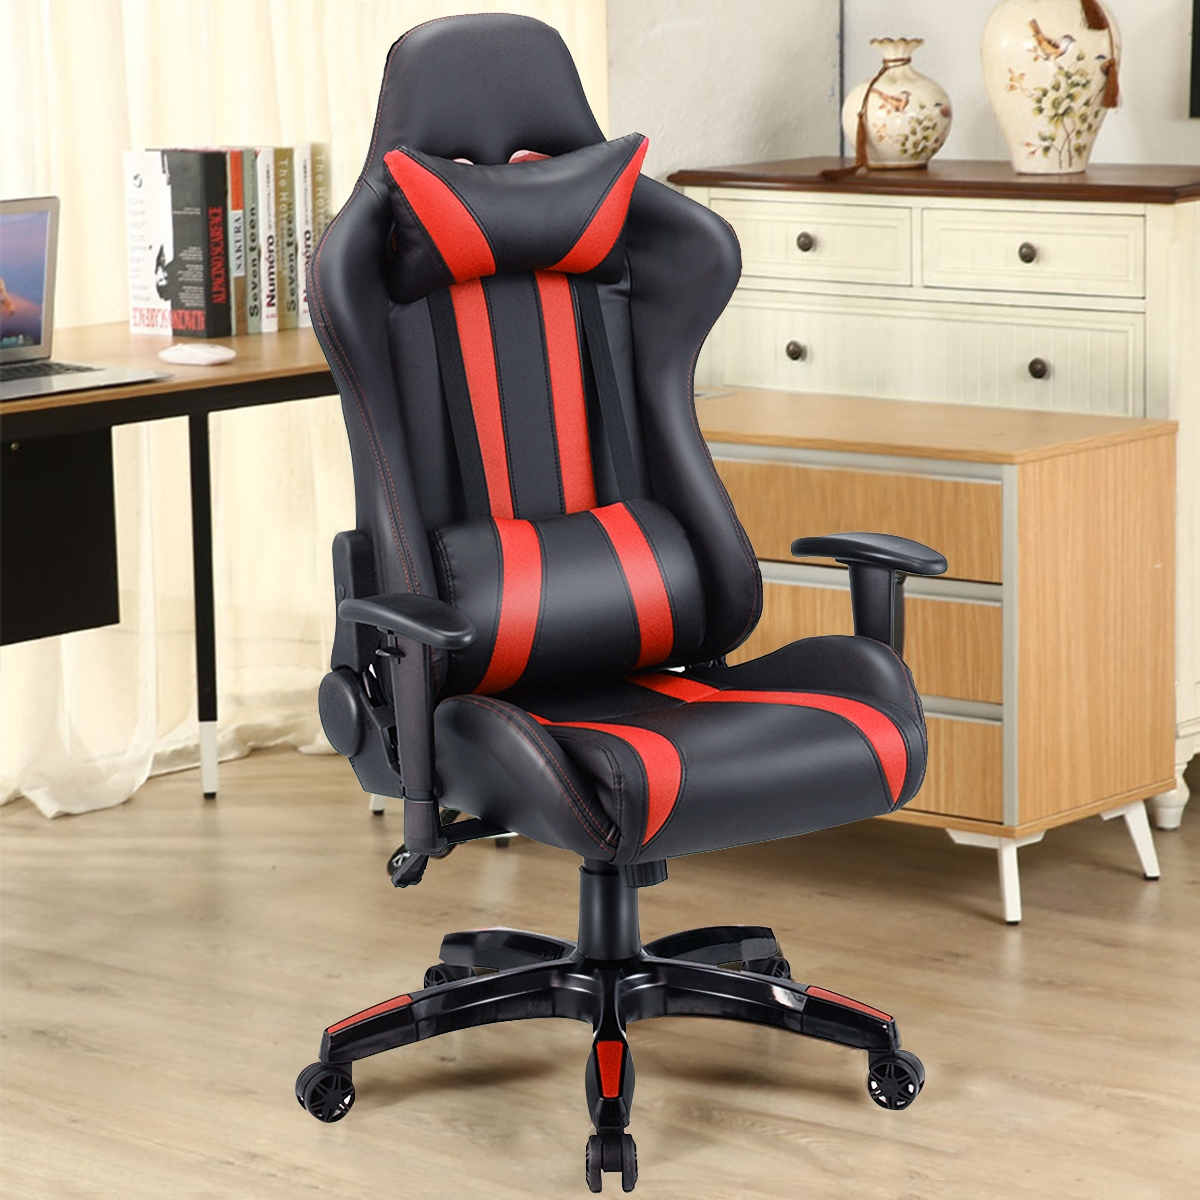 Executive Racing Style High Back Reclining Chair Gaming Chair Office Computer Red Fastsupreme